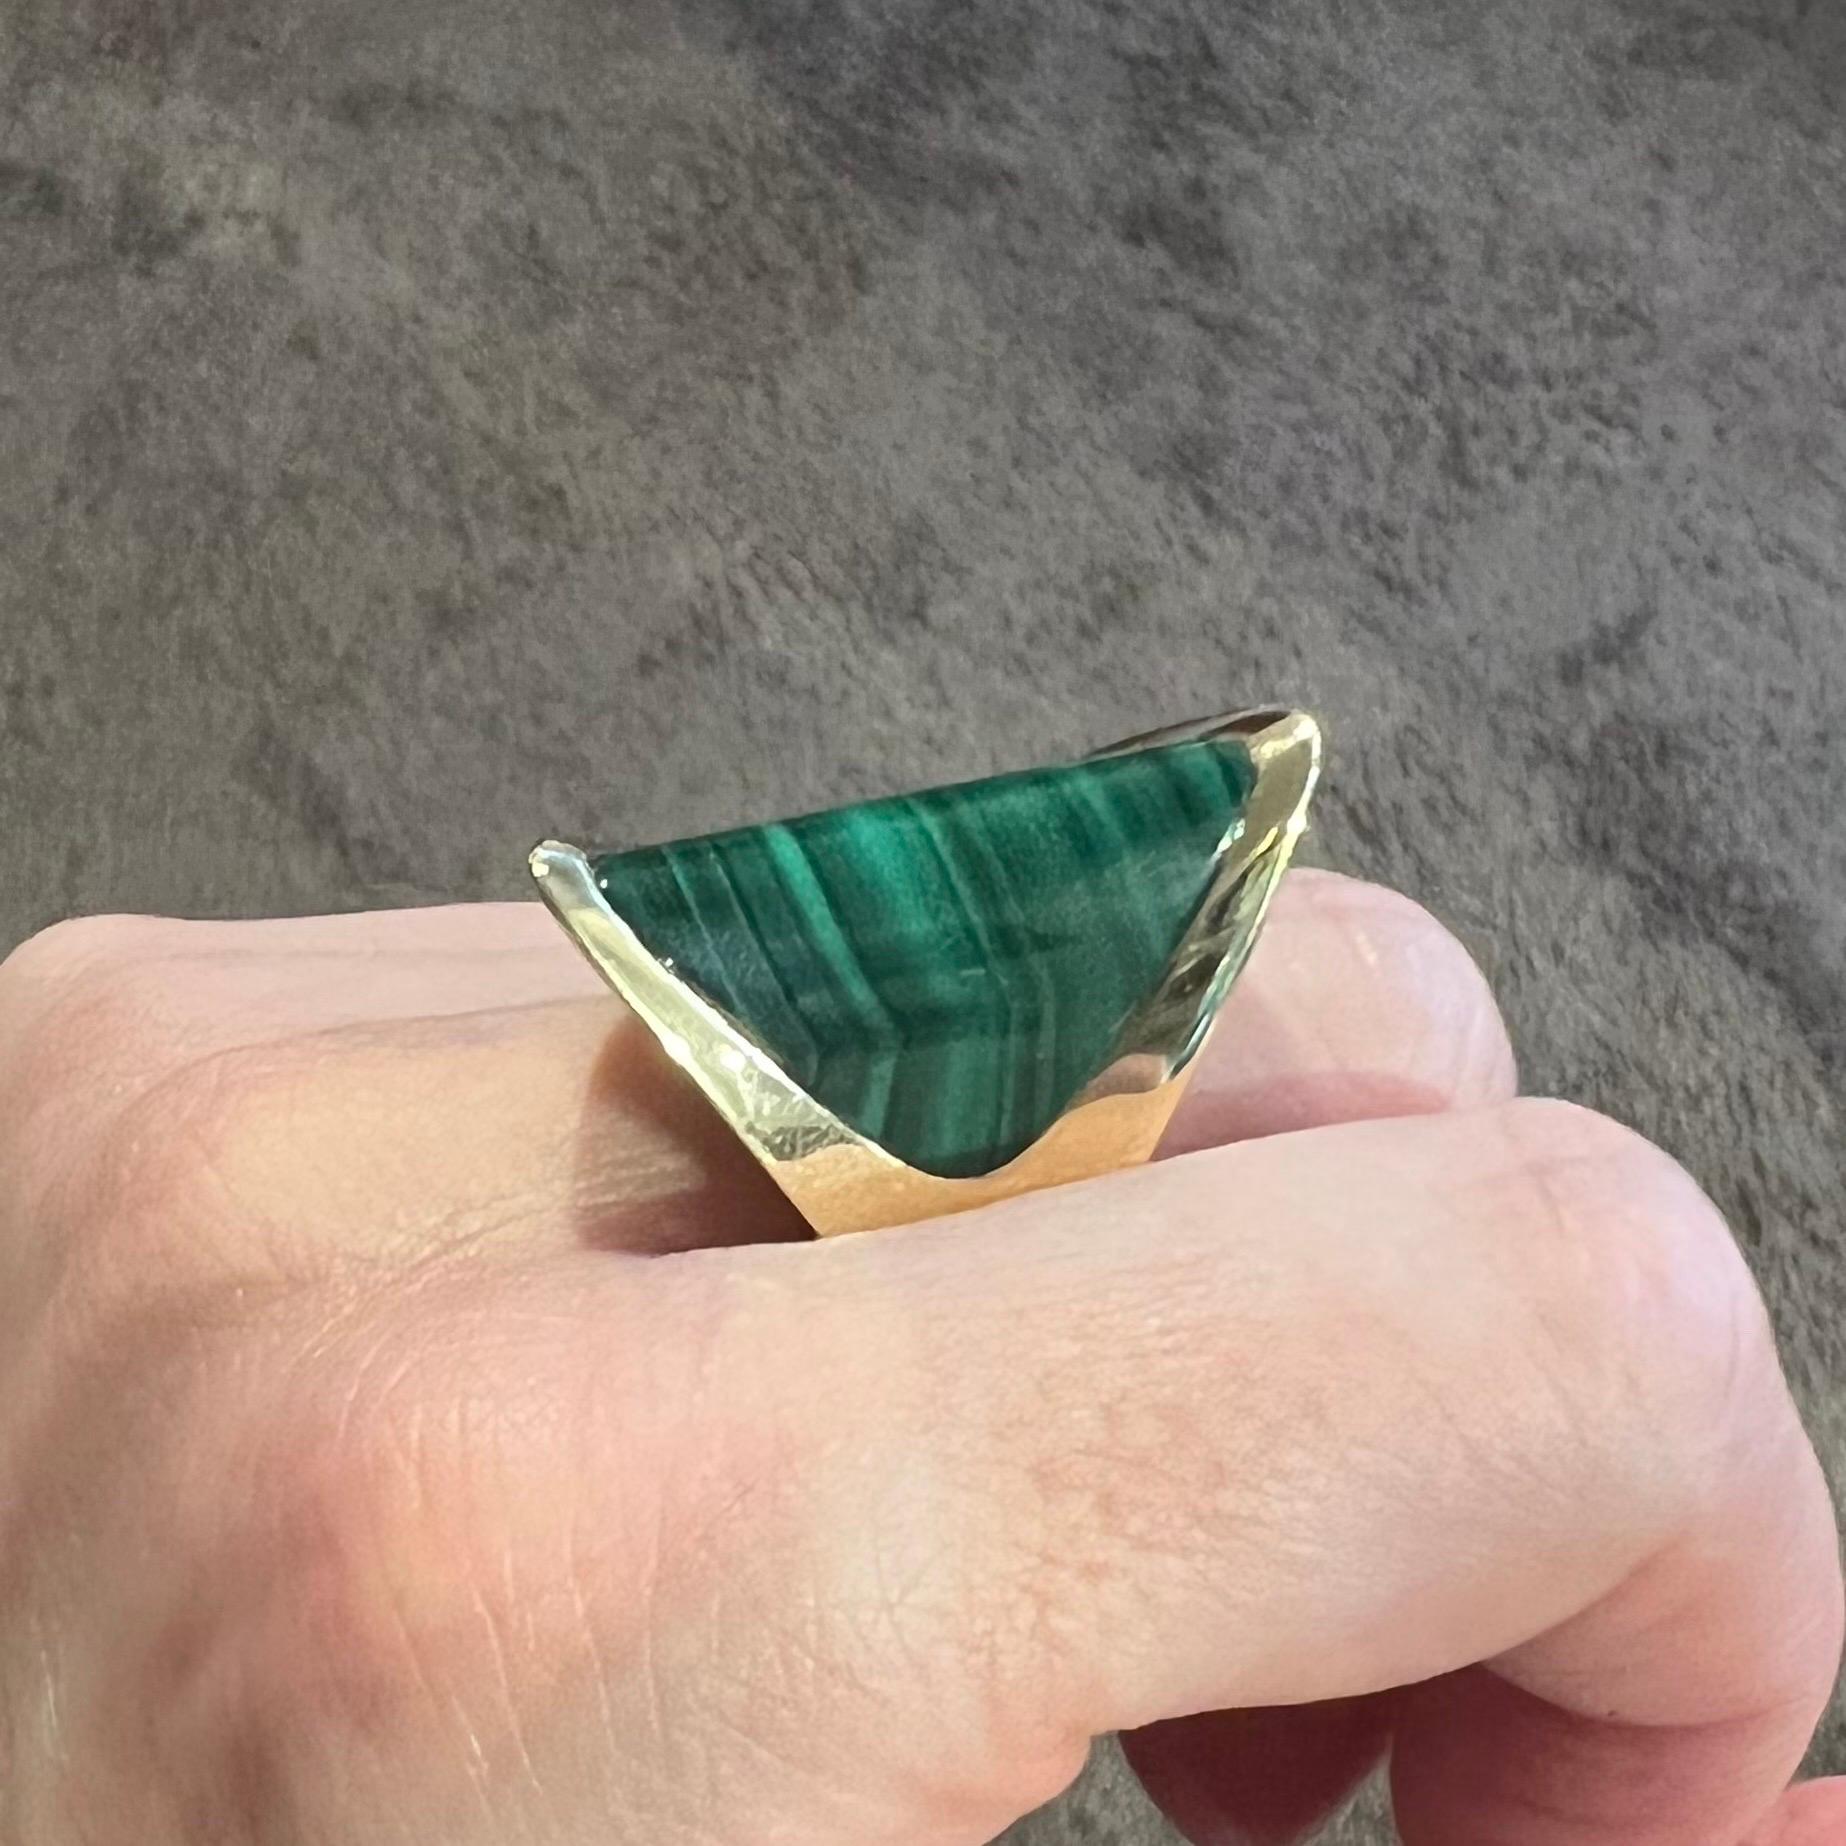 Piaget 18 Karat Yellow Gold and Malachite Cocktail Ring, circa 1970s For Sale 2